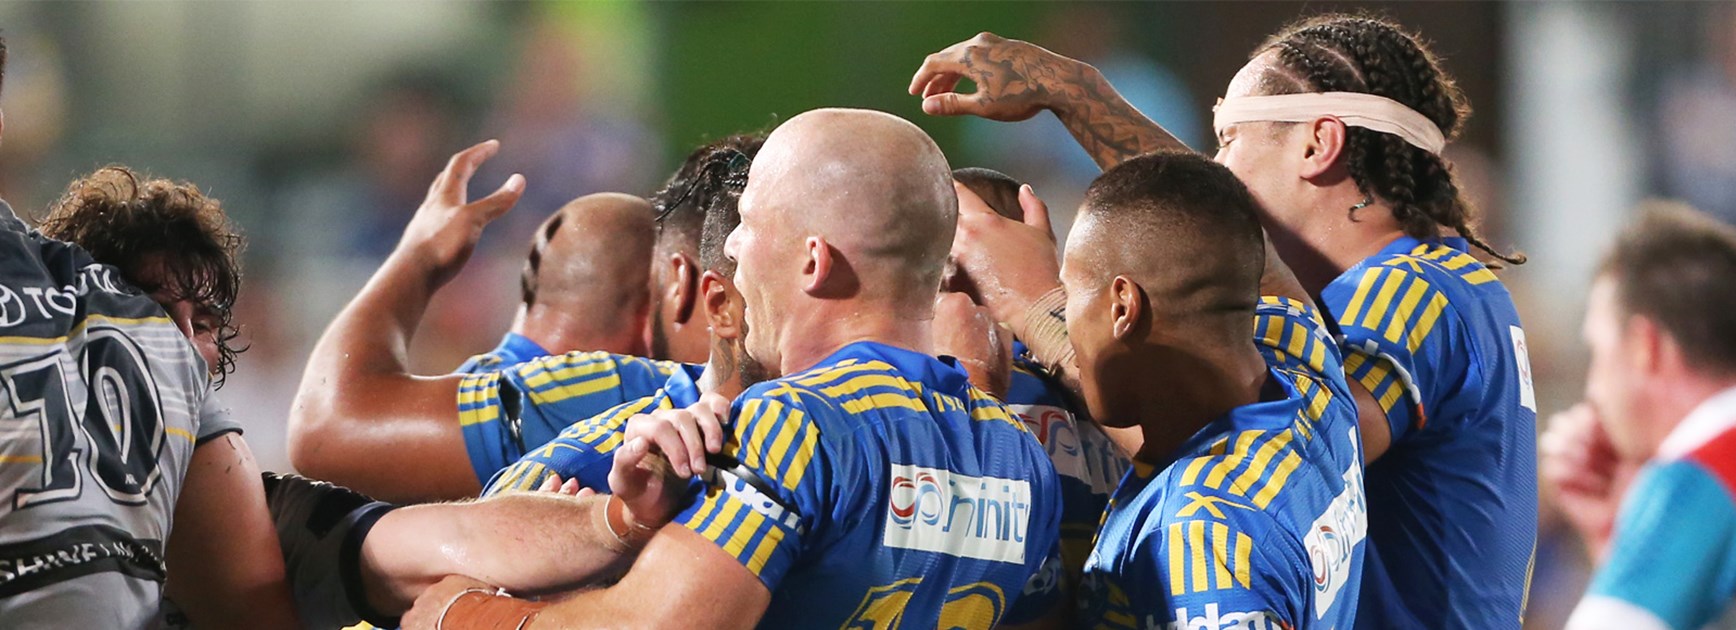 The Parramatta Eels celebrate a try during their Round 2 win over the Cowboys.